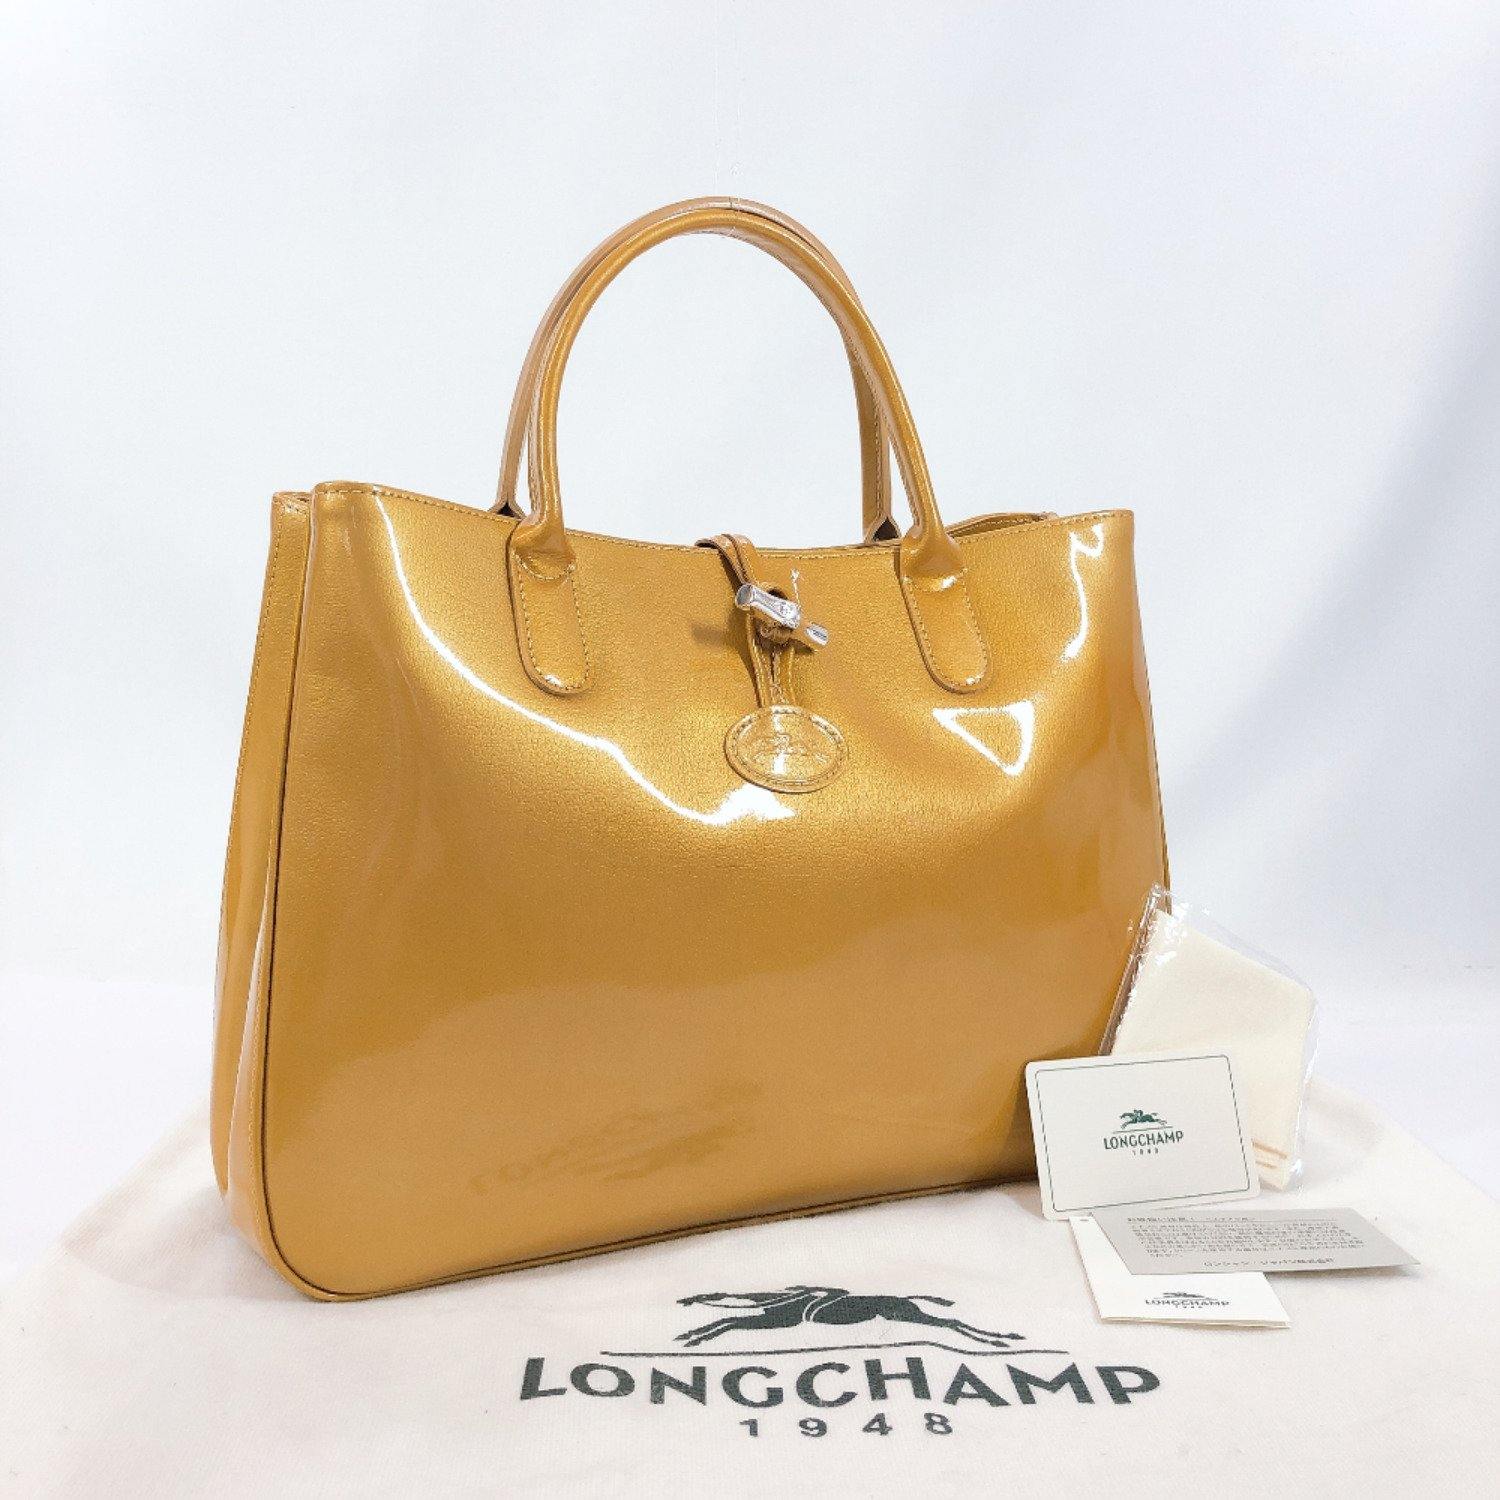 Longchamp Tote Bag Patent leather Mustard color Women Used – JP